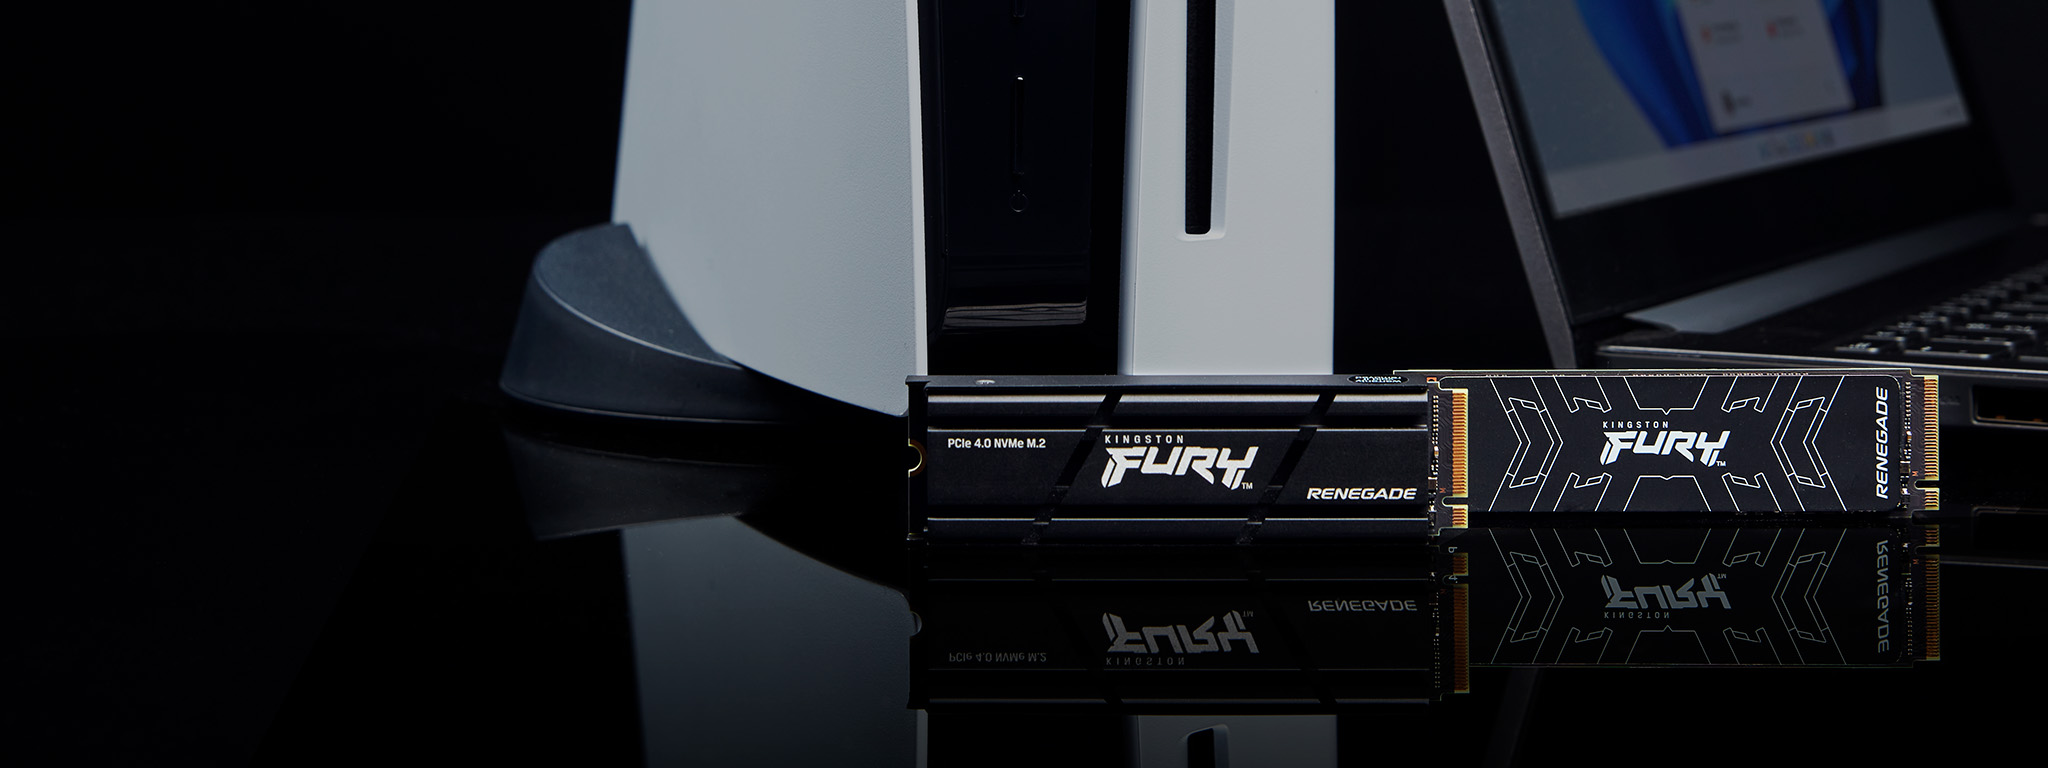 Two Kingston FURY Renegade SSDs, with and without heatsink sit next to a PS5 and a laptop.